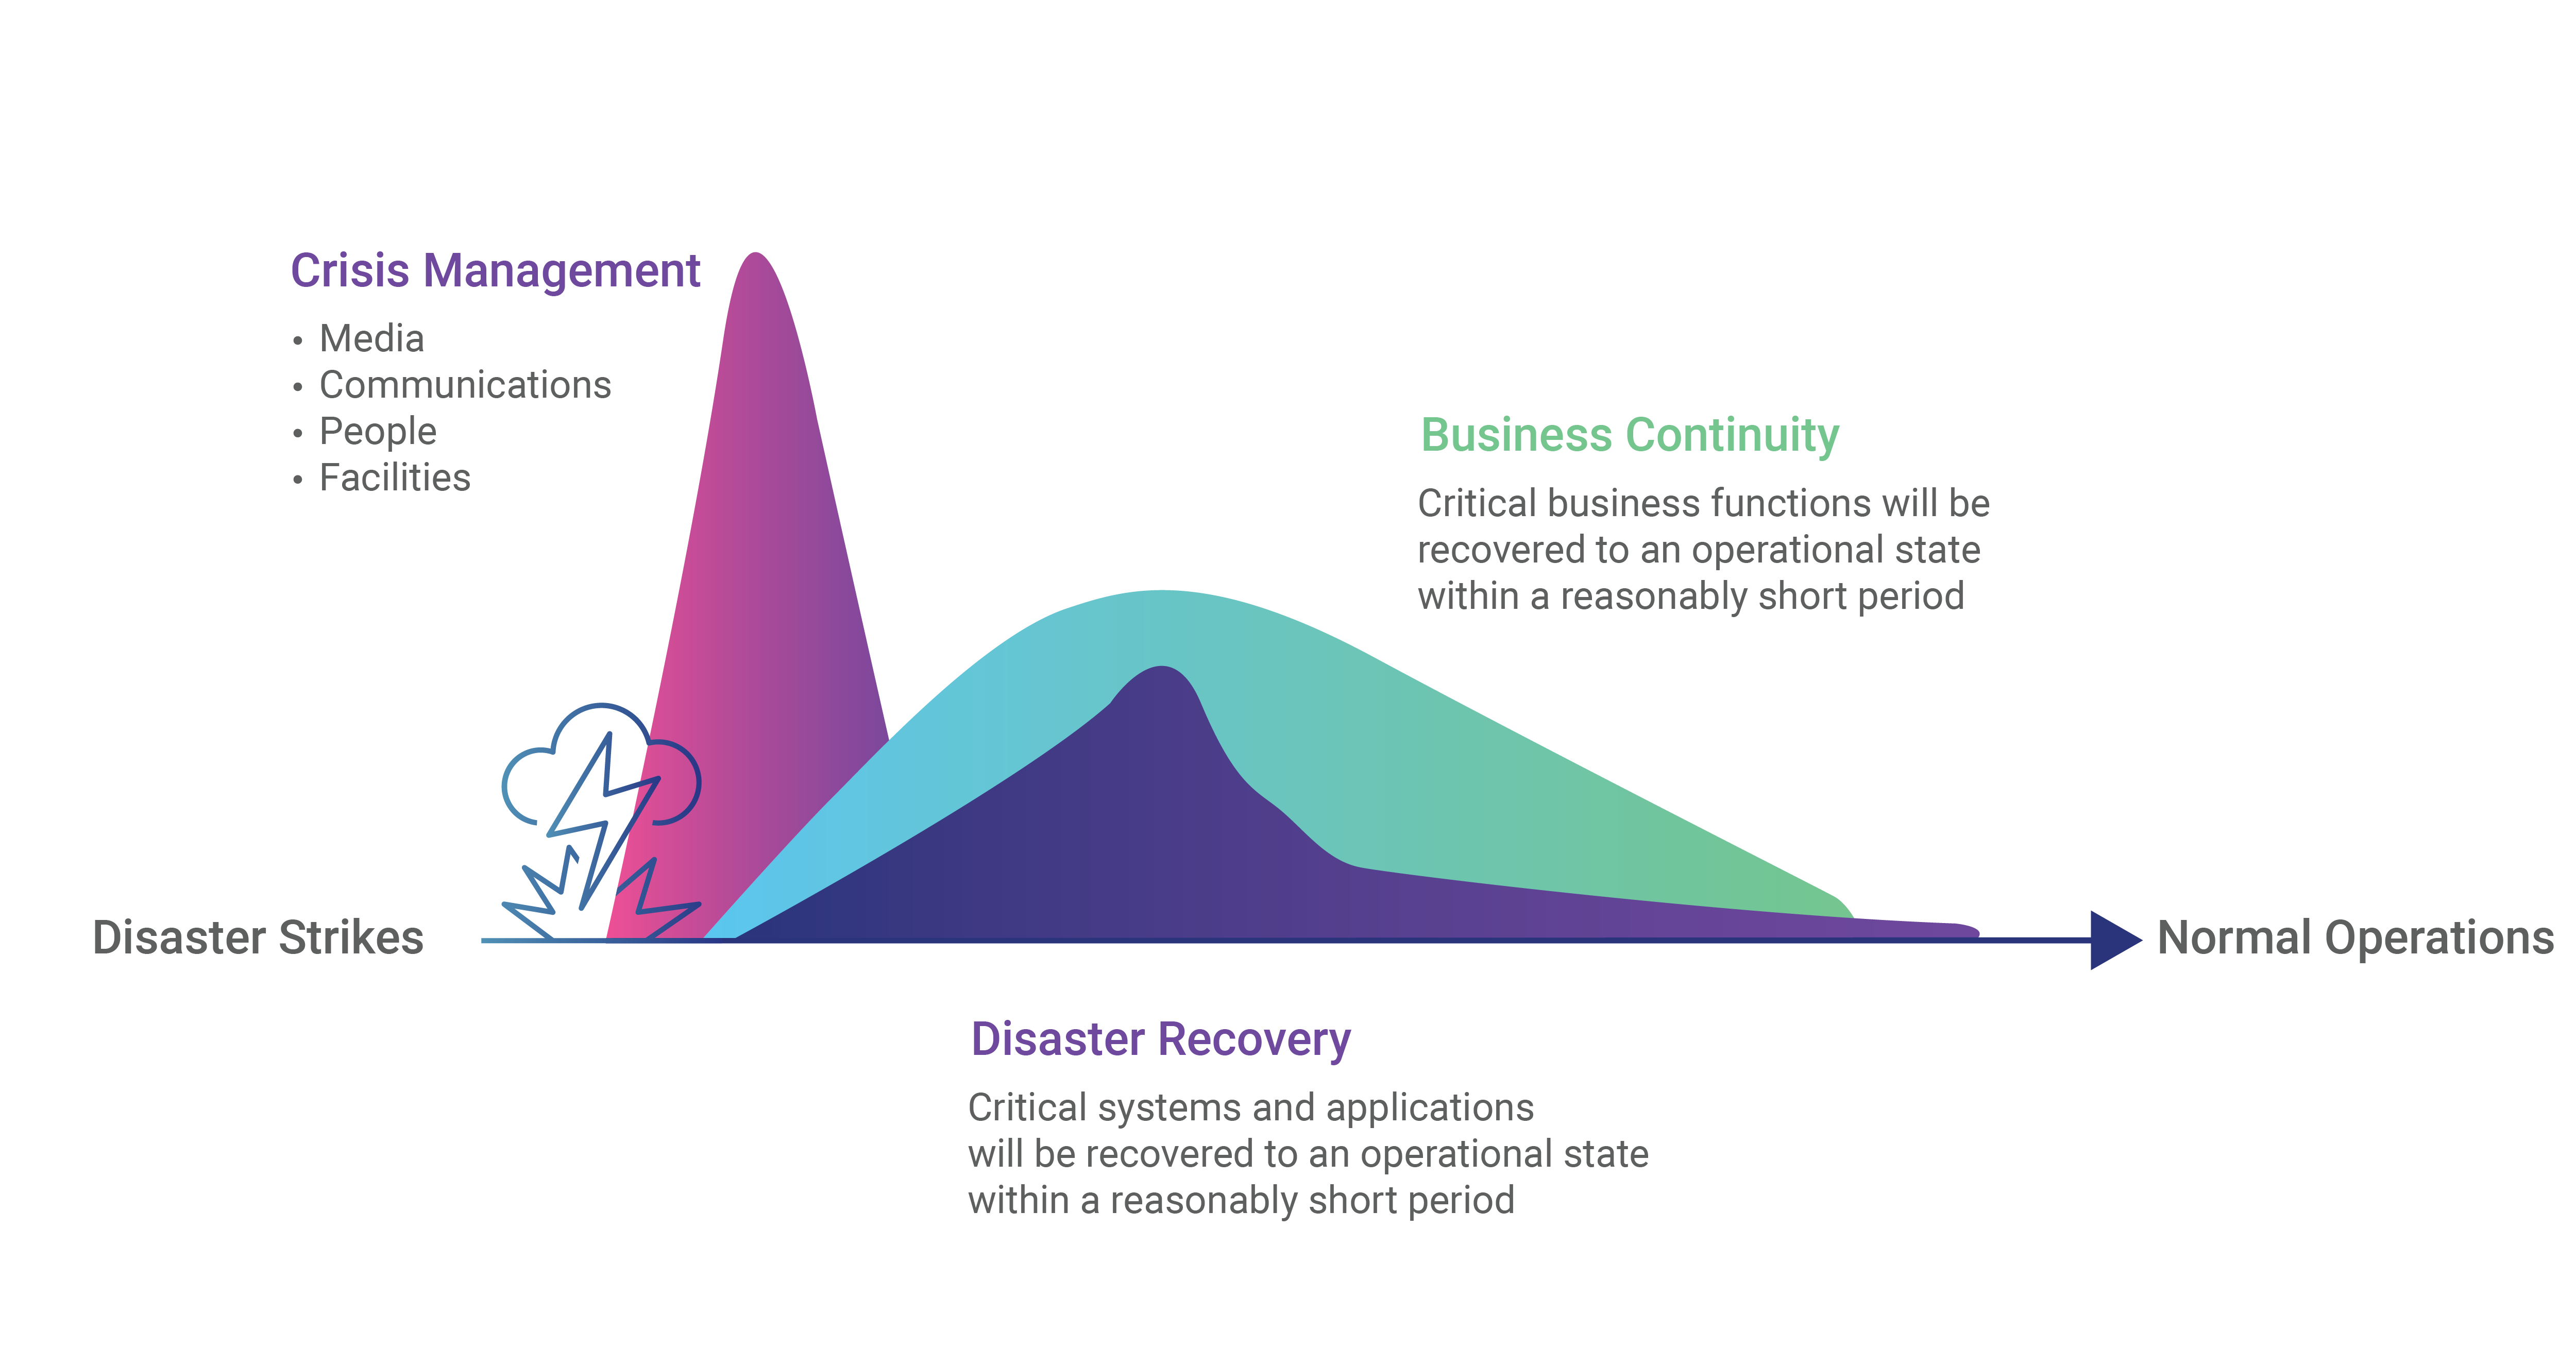 The BCM progression from disaster management to normal operations